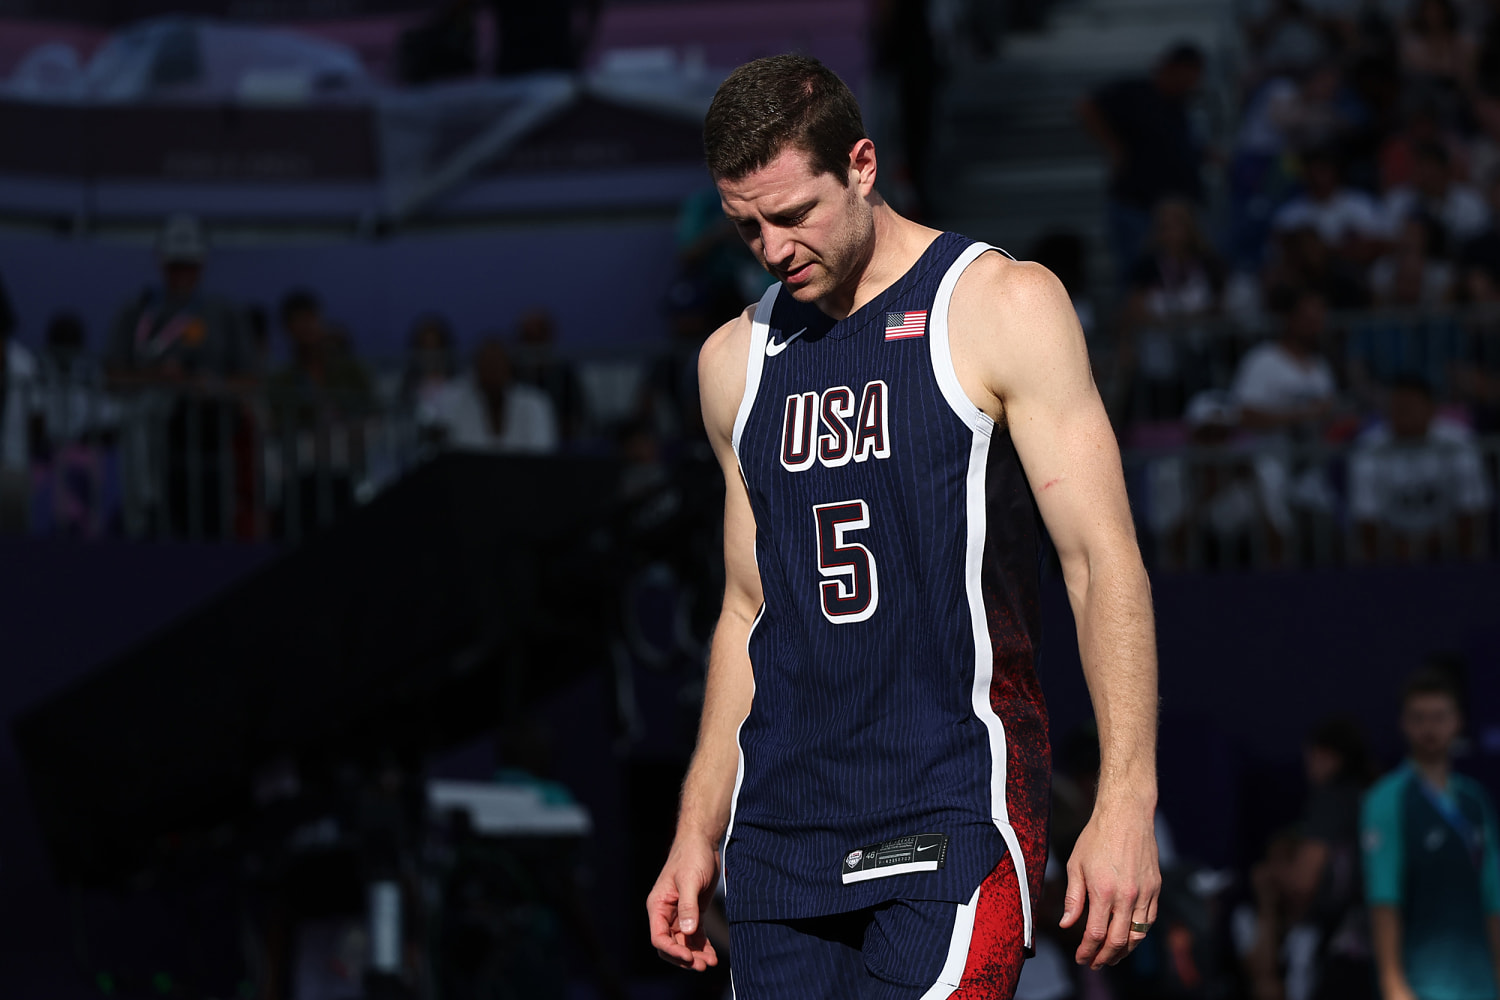 USA 3x3 basketball's Jimmer Fredette tears ligaments, out for 6 months